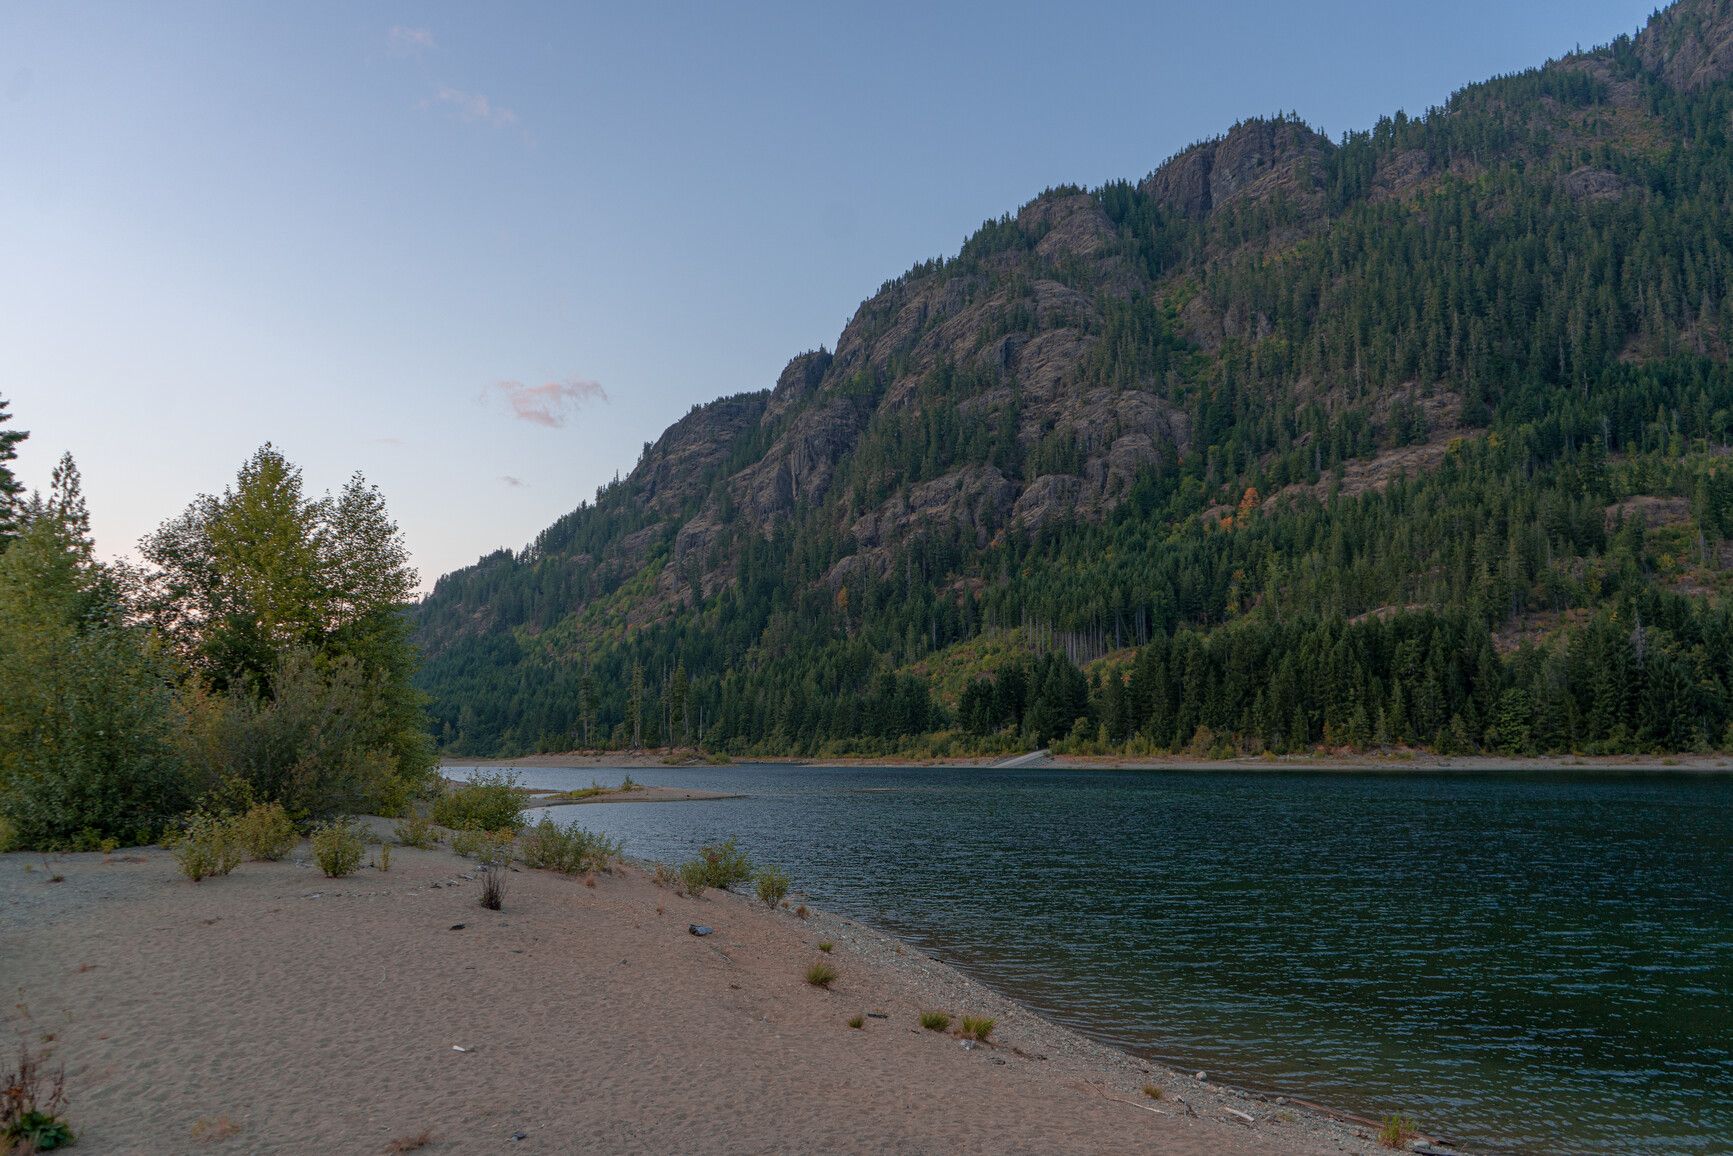 A sandy beach by the lake and mountains in Strathcona - Westmin Park.